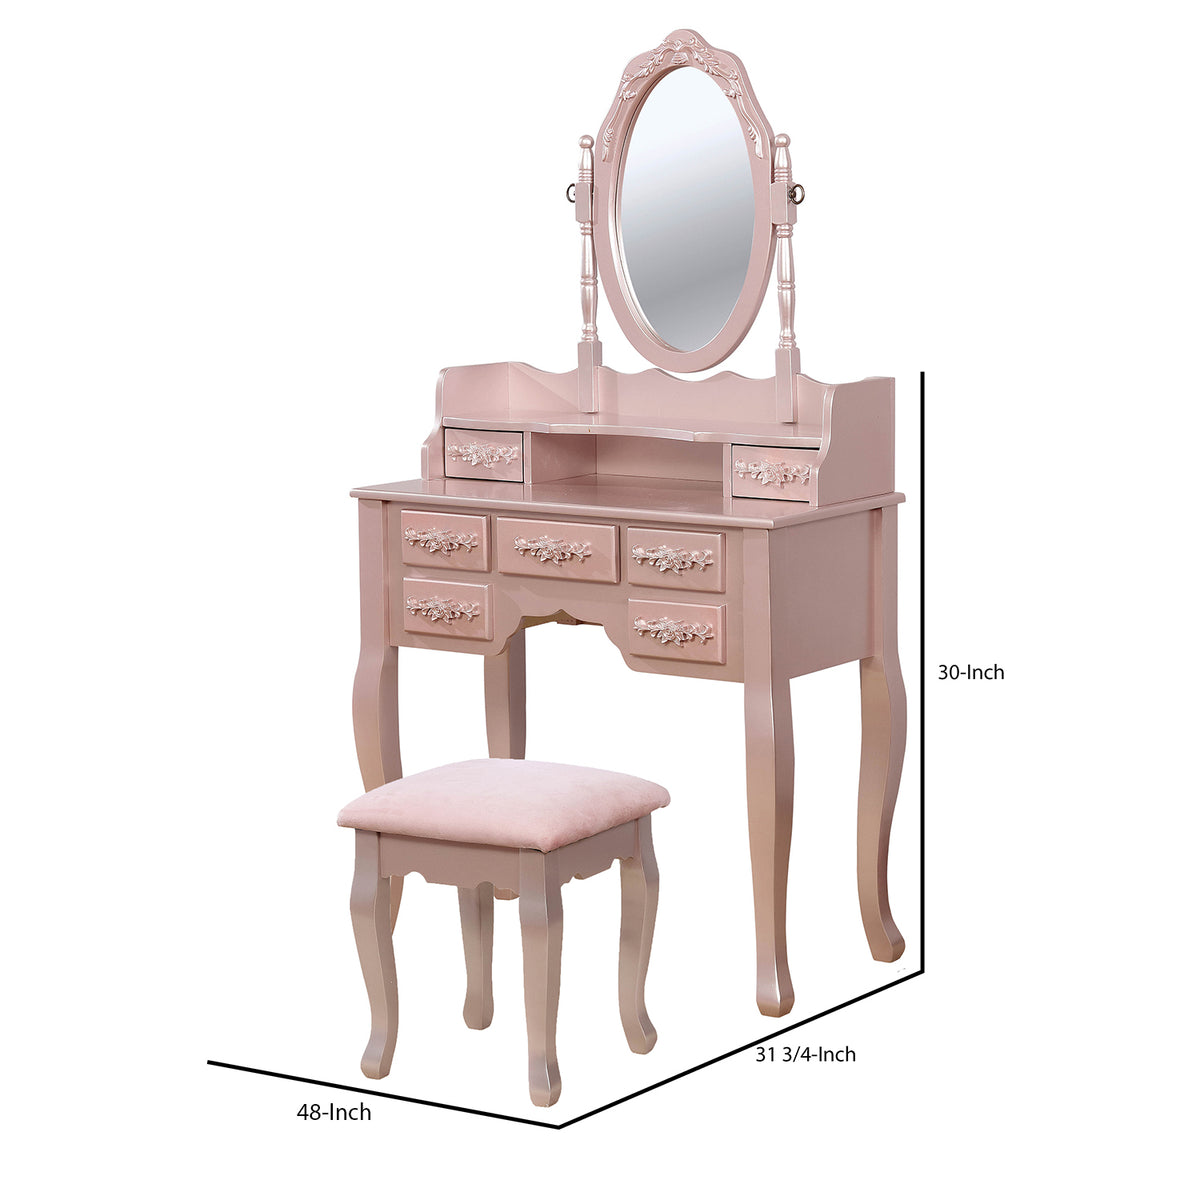 7 Drawers Wooden Frame Vanity Set with Stool and Cabriole Legs in Rose Gold - BM207329